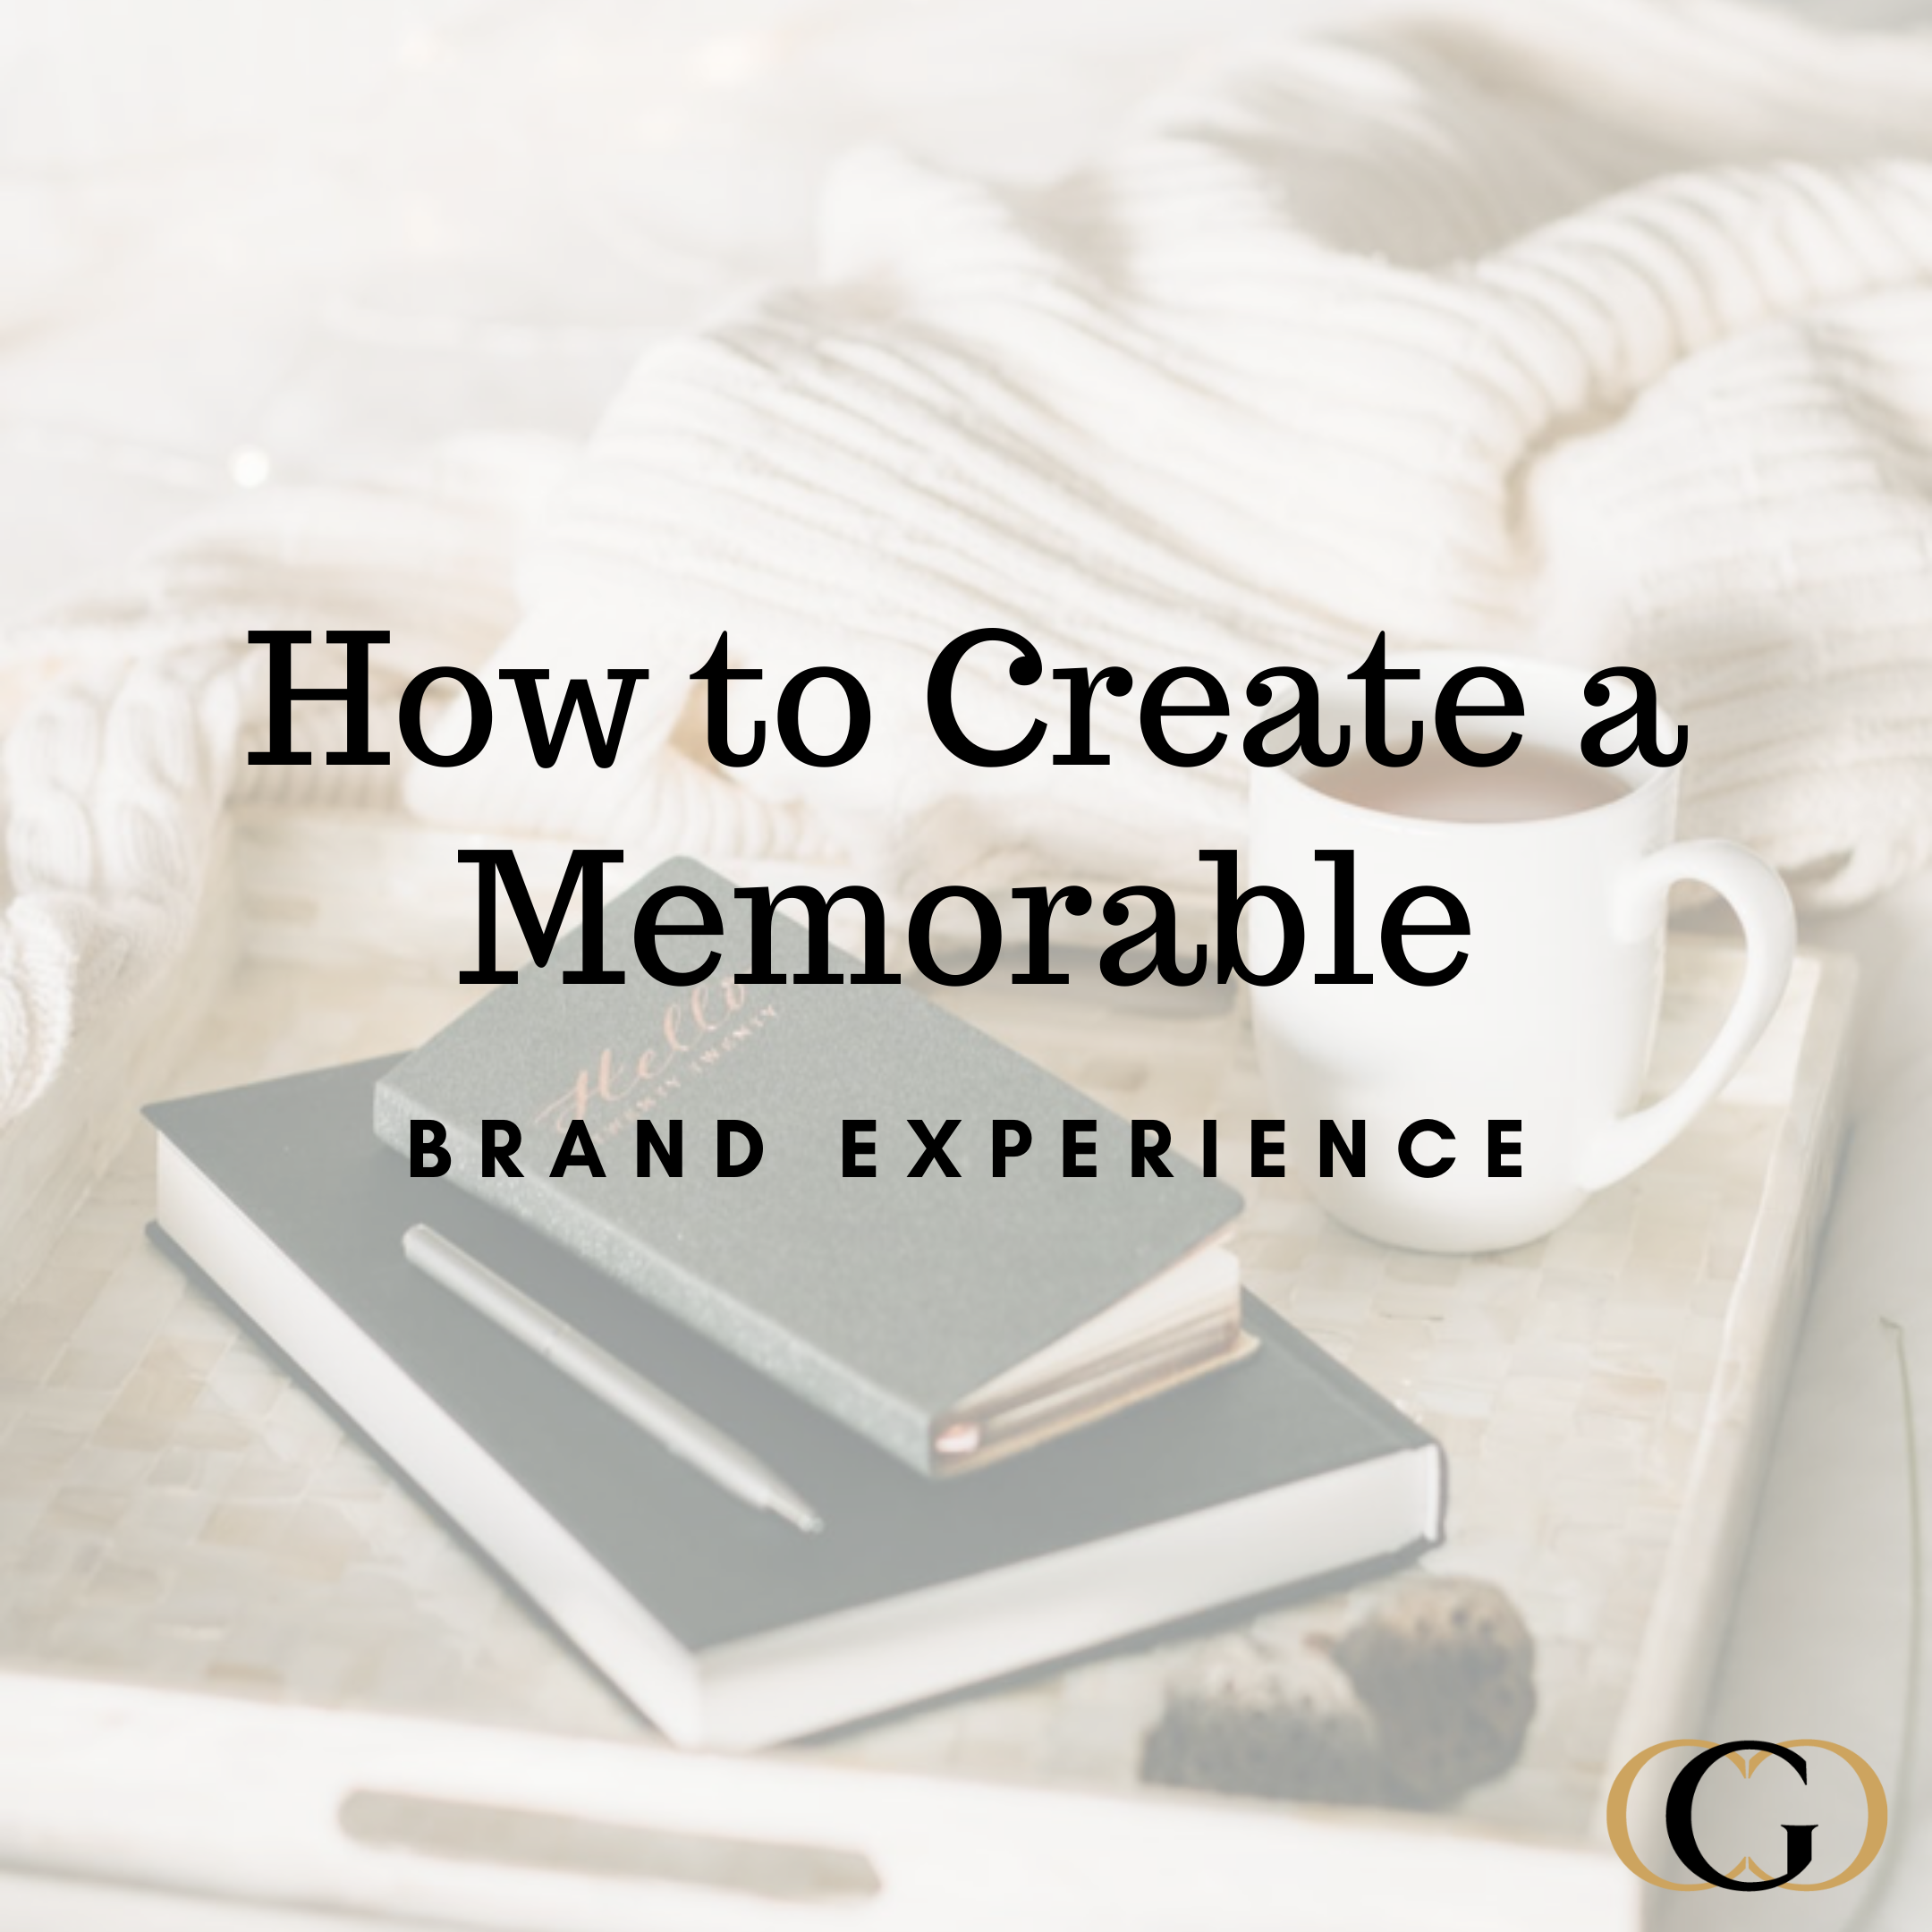 How to Create a Memorable Brand Experience